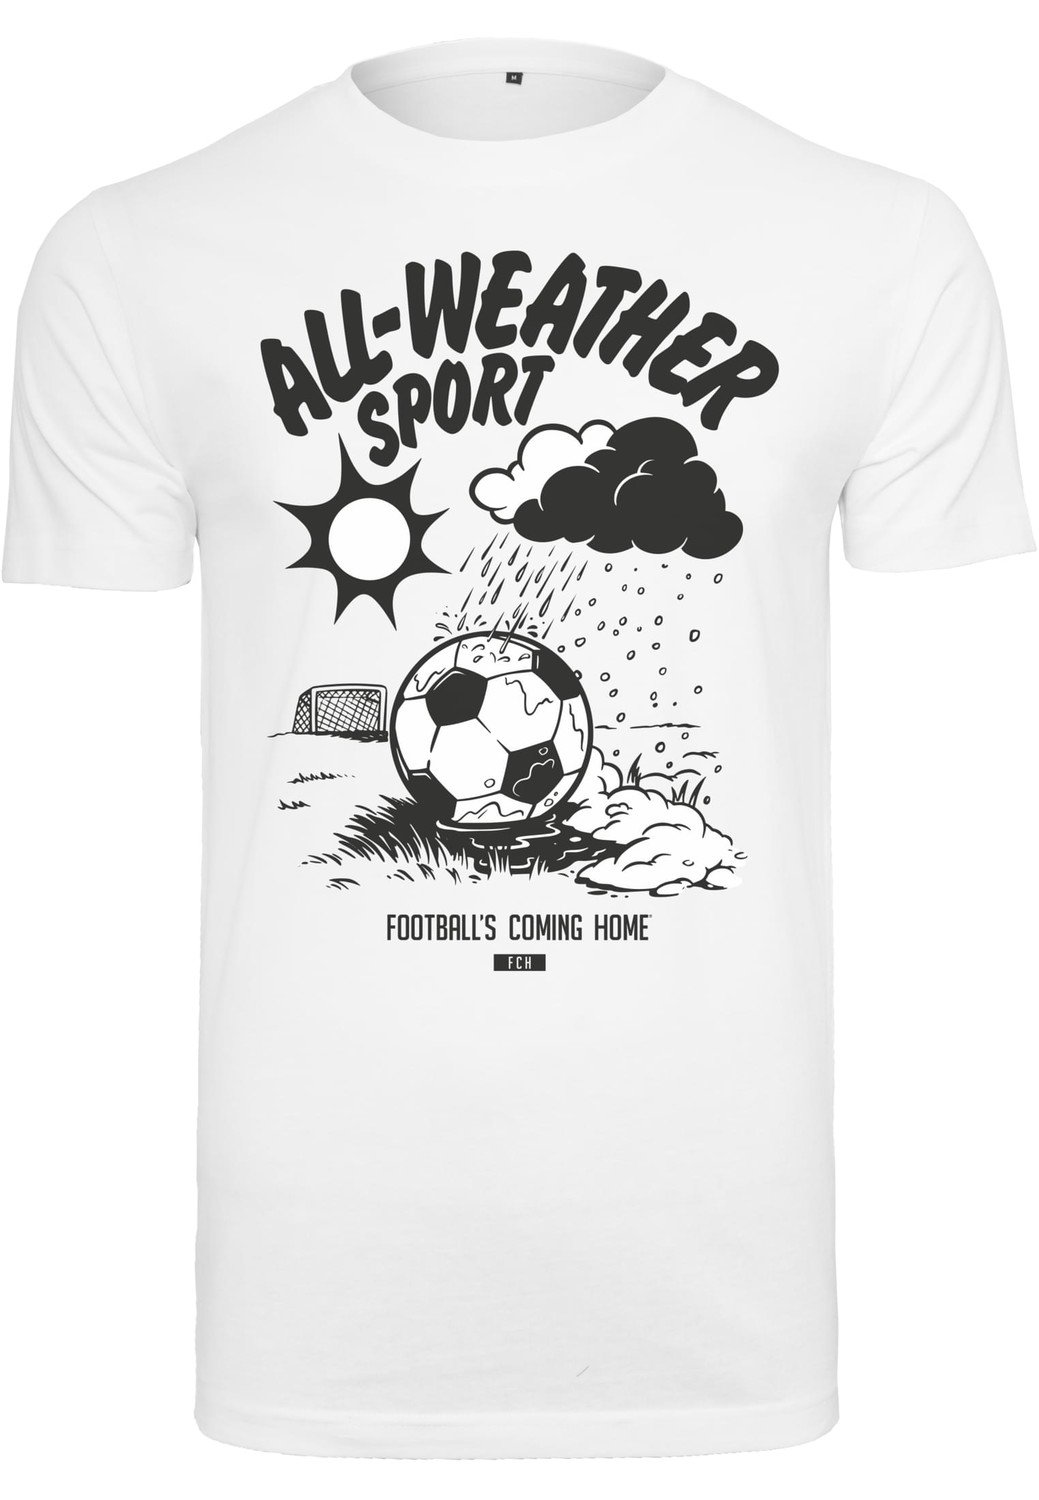 Footballs Coming Home All Weather Sports Tee white